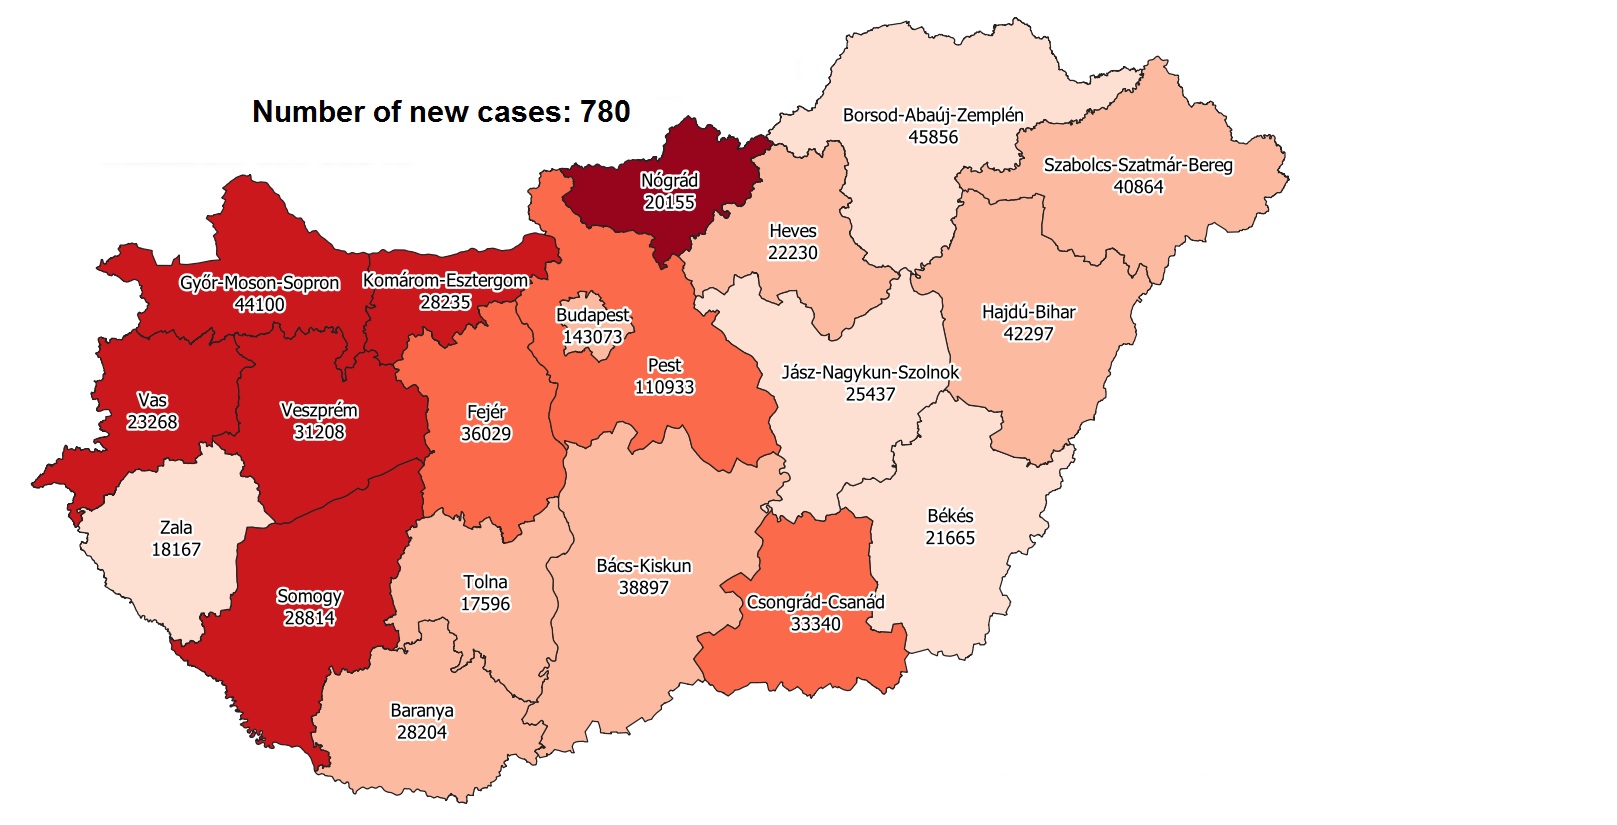 Hungary Records 51 Covid Fatalities, 780 New Infections